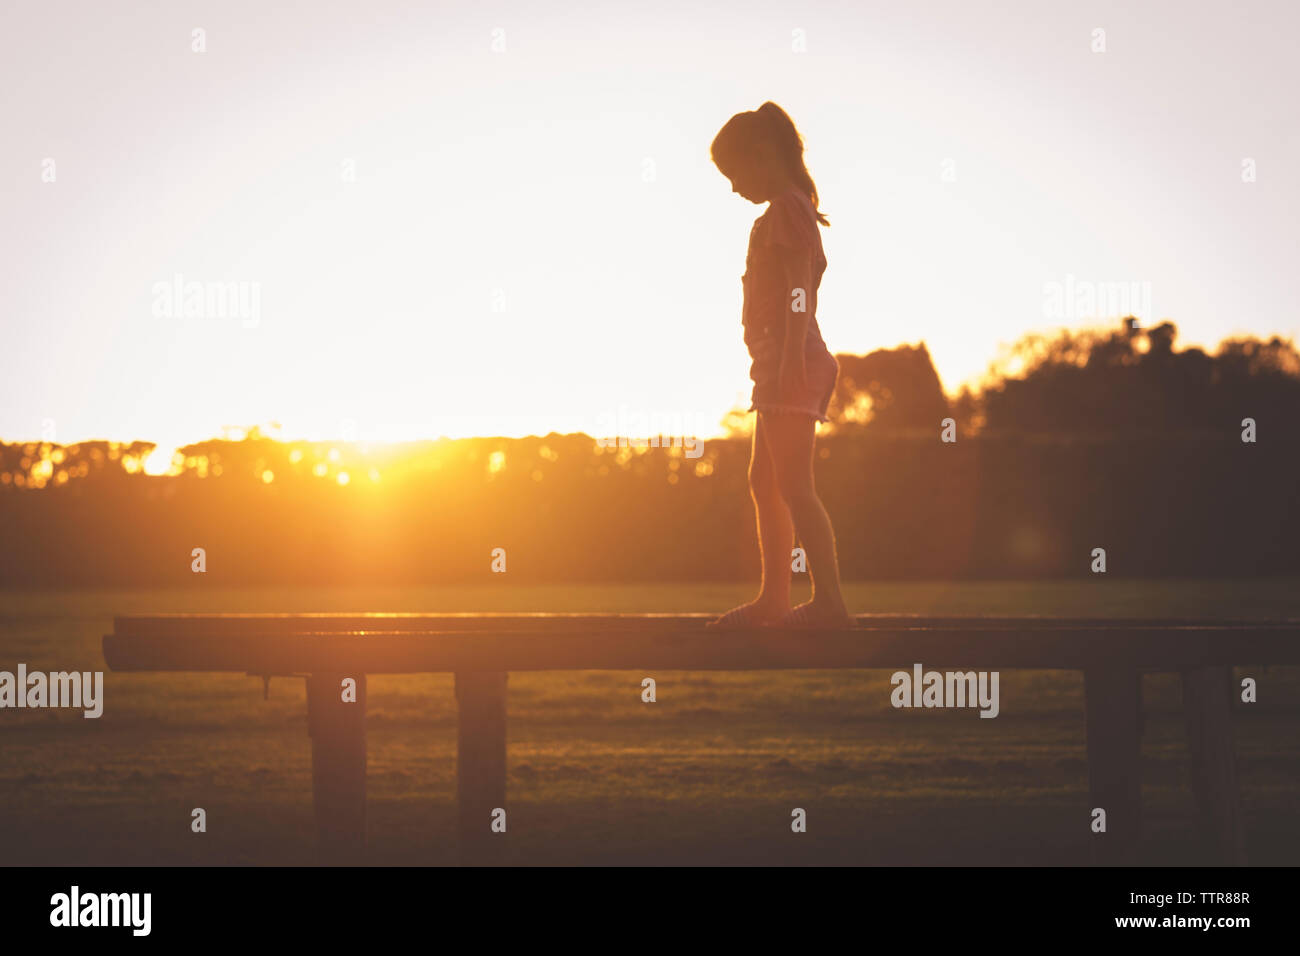 Side view of young girl walking on playground equipment at sunset Stock Photo